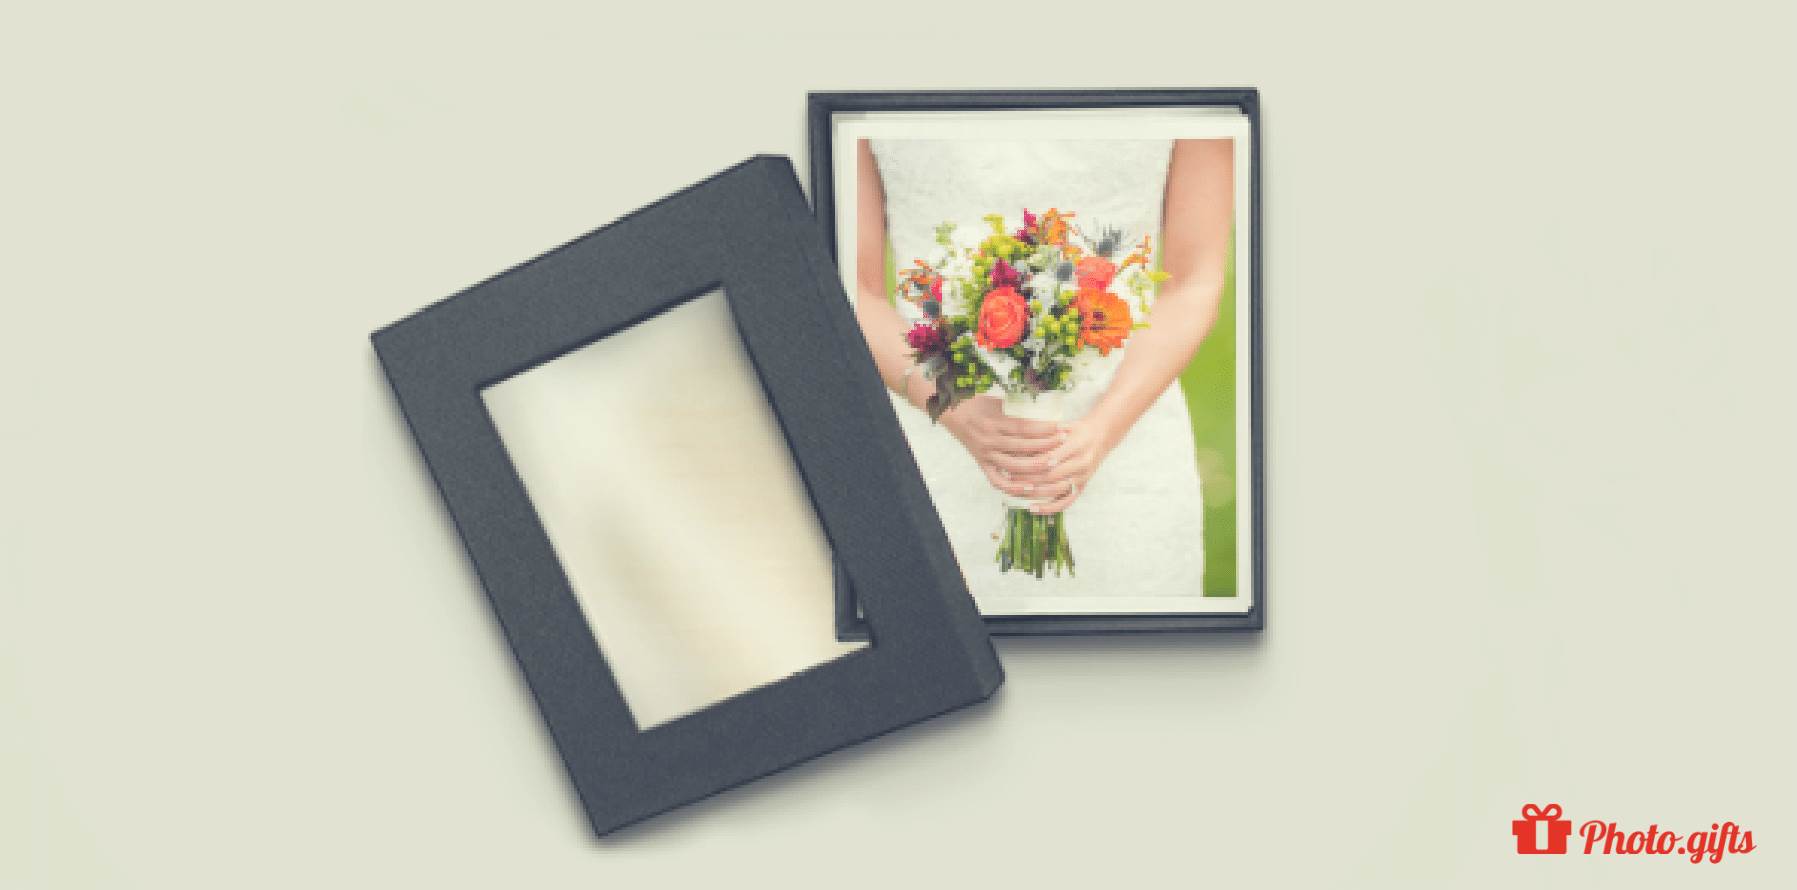 Share your favourite wedding photographs in a Photo Box